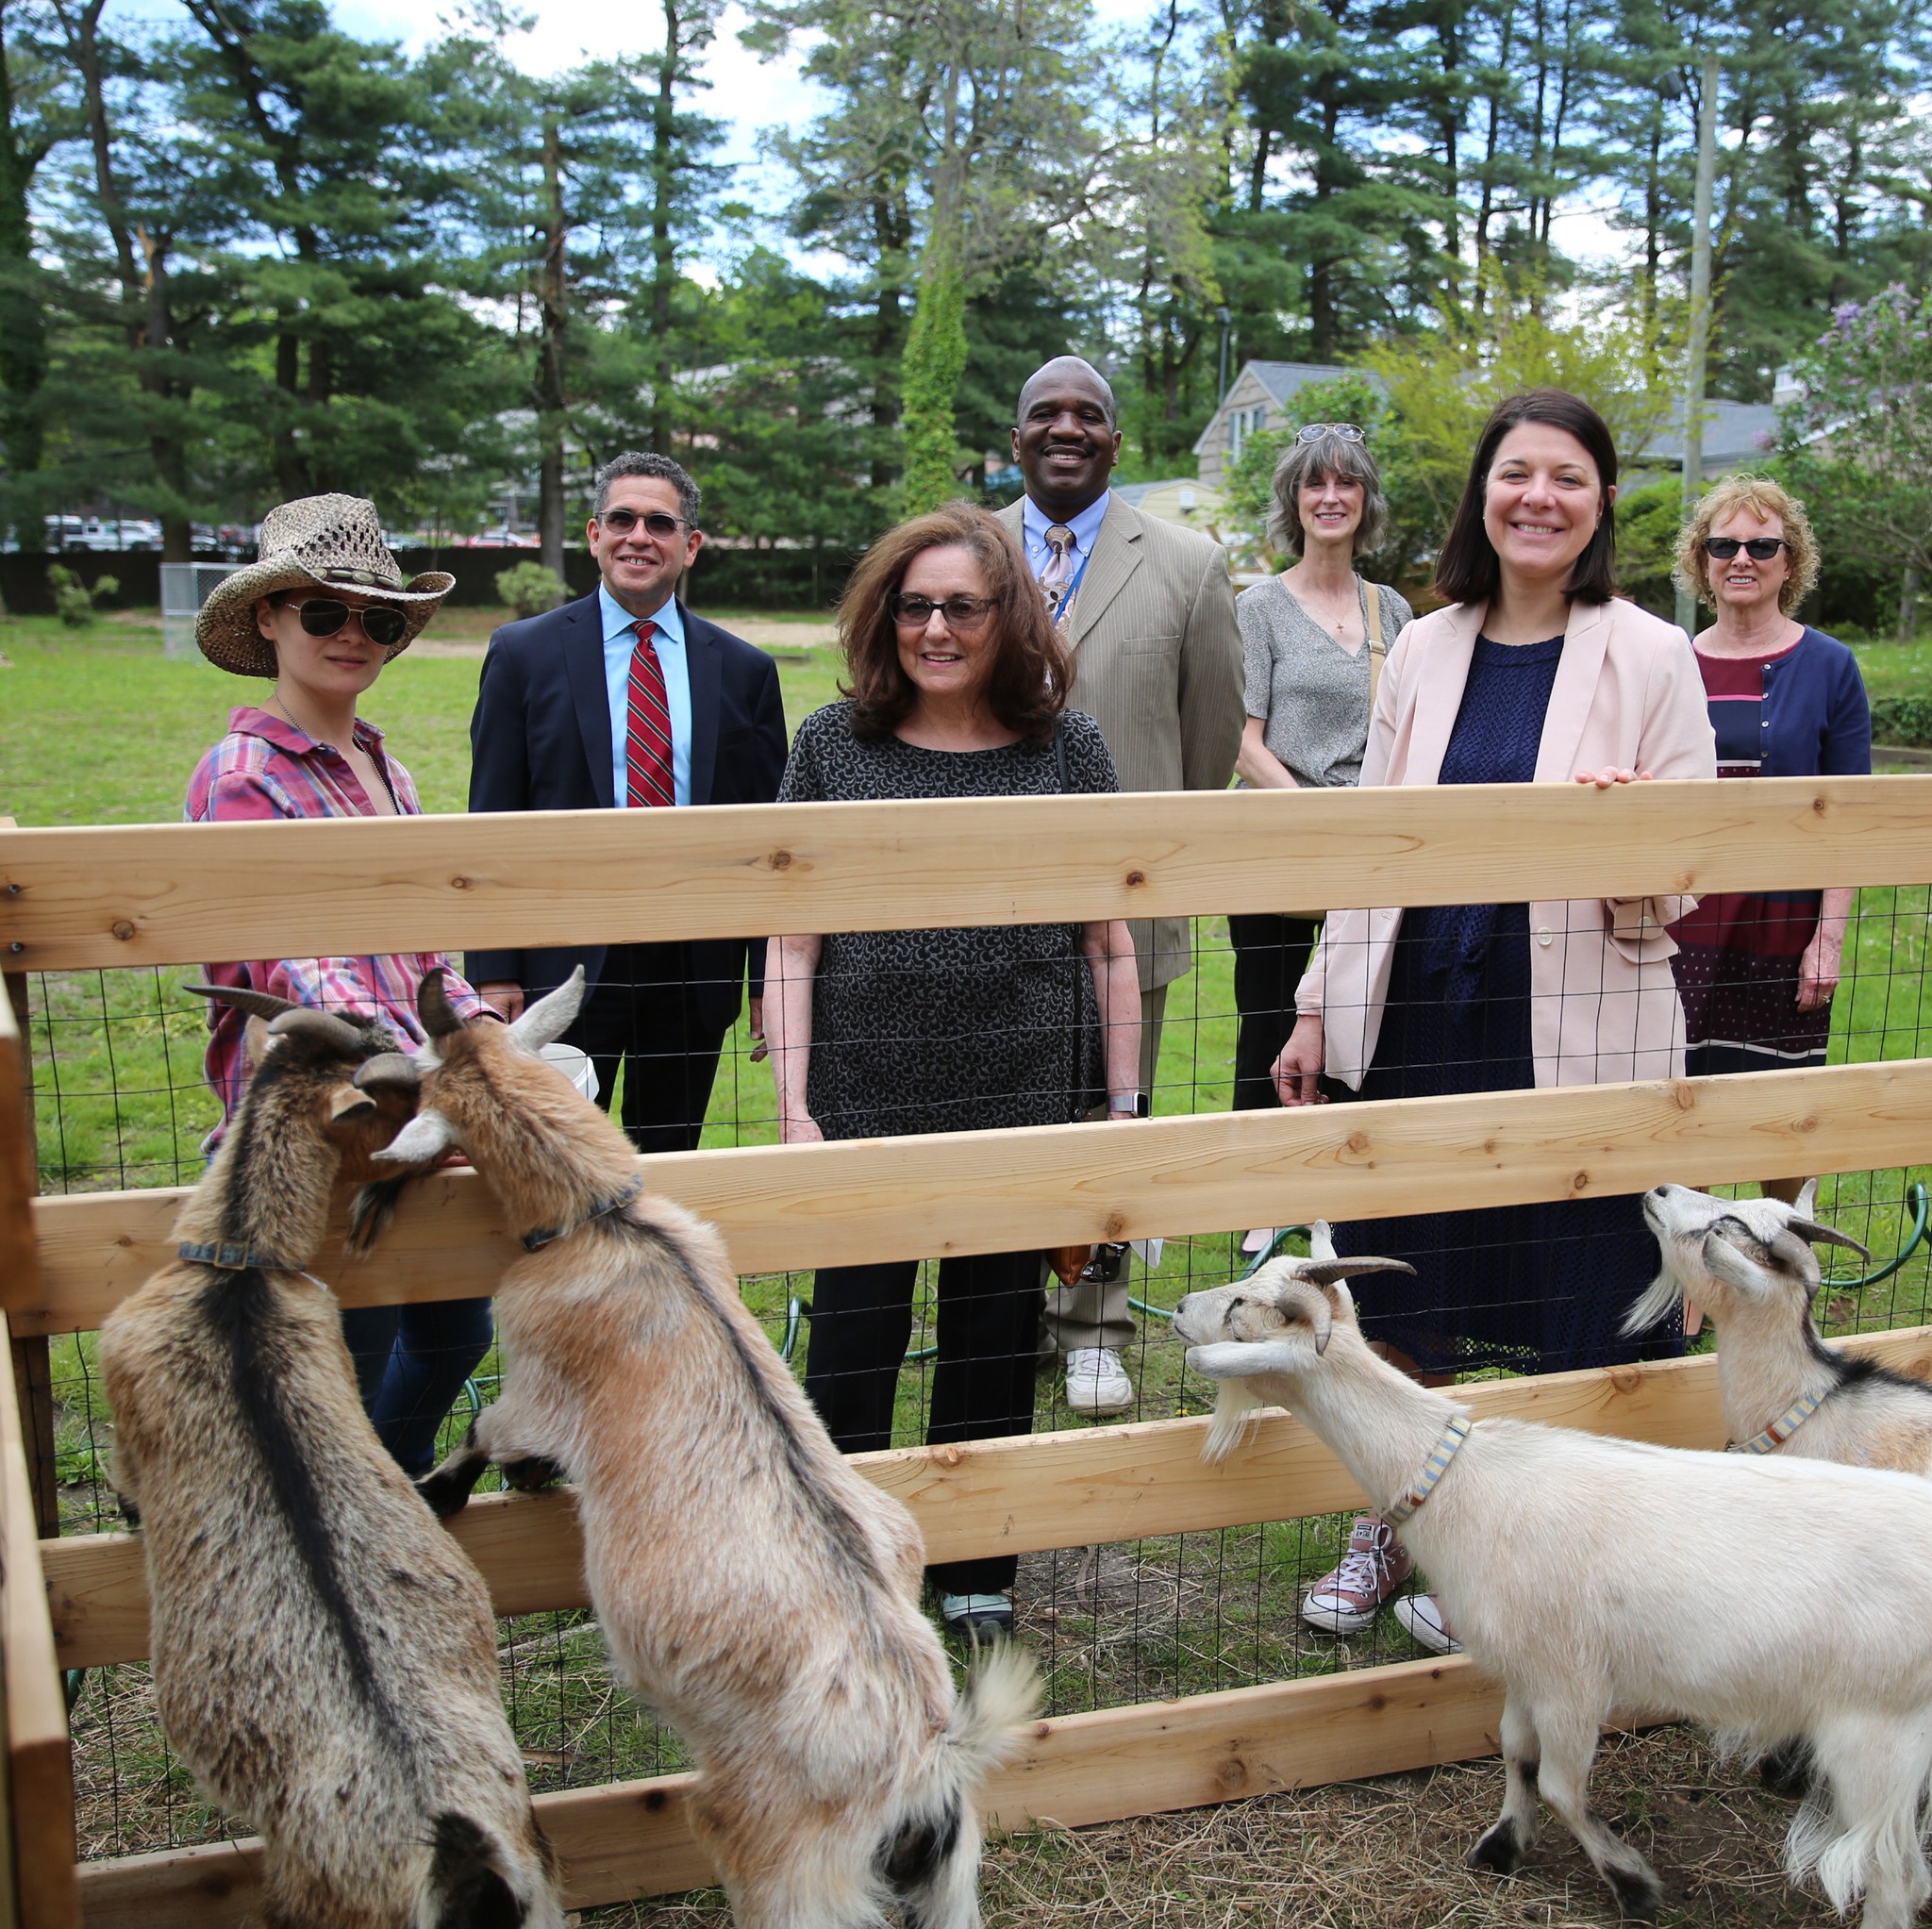 OPWDD Commissioner visit AHRC Nassau and tours Wheatley Farms